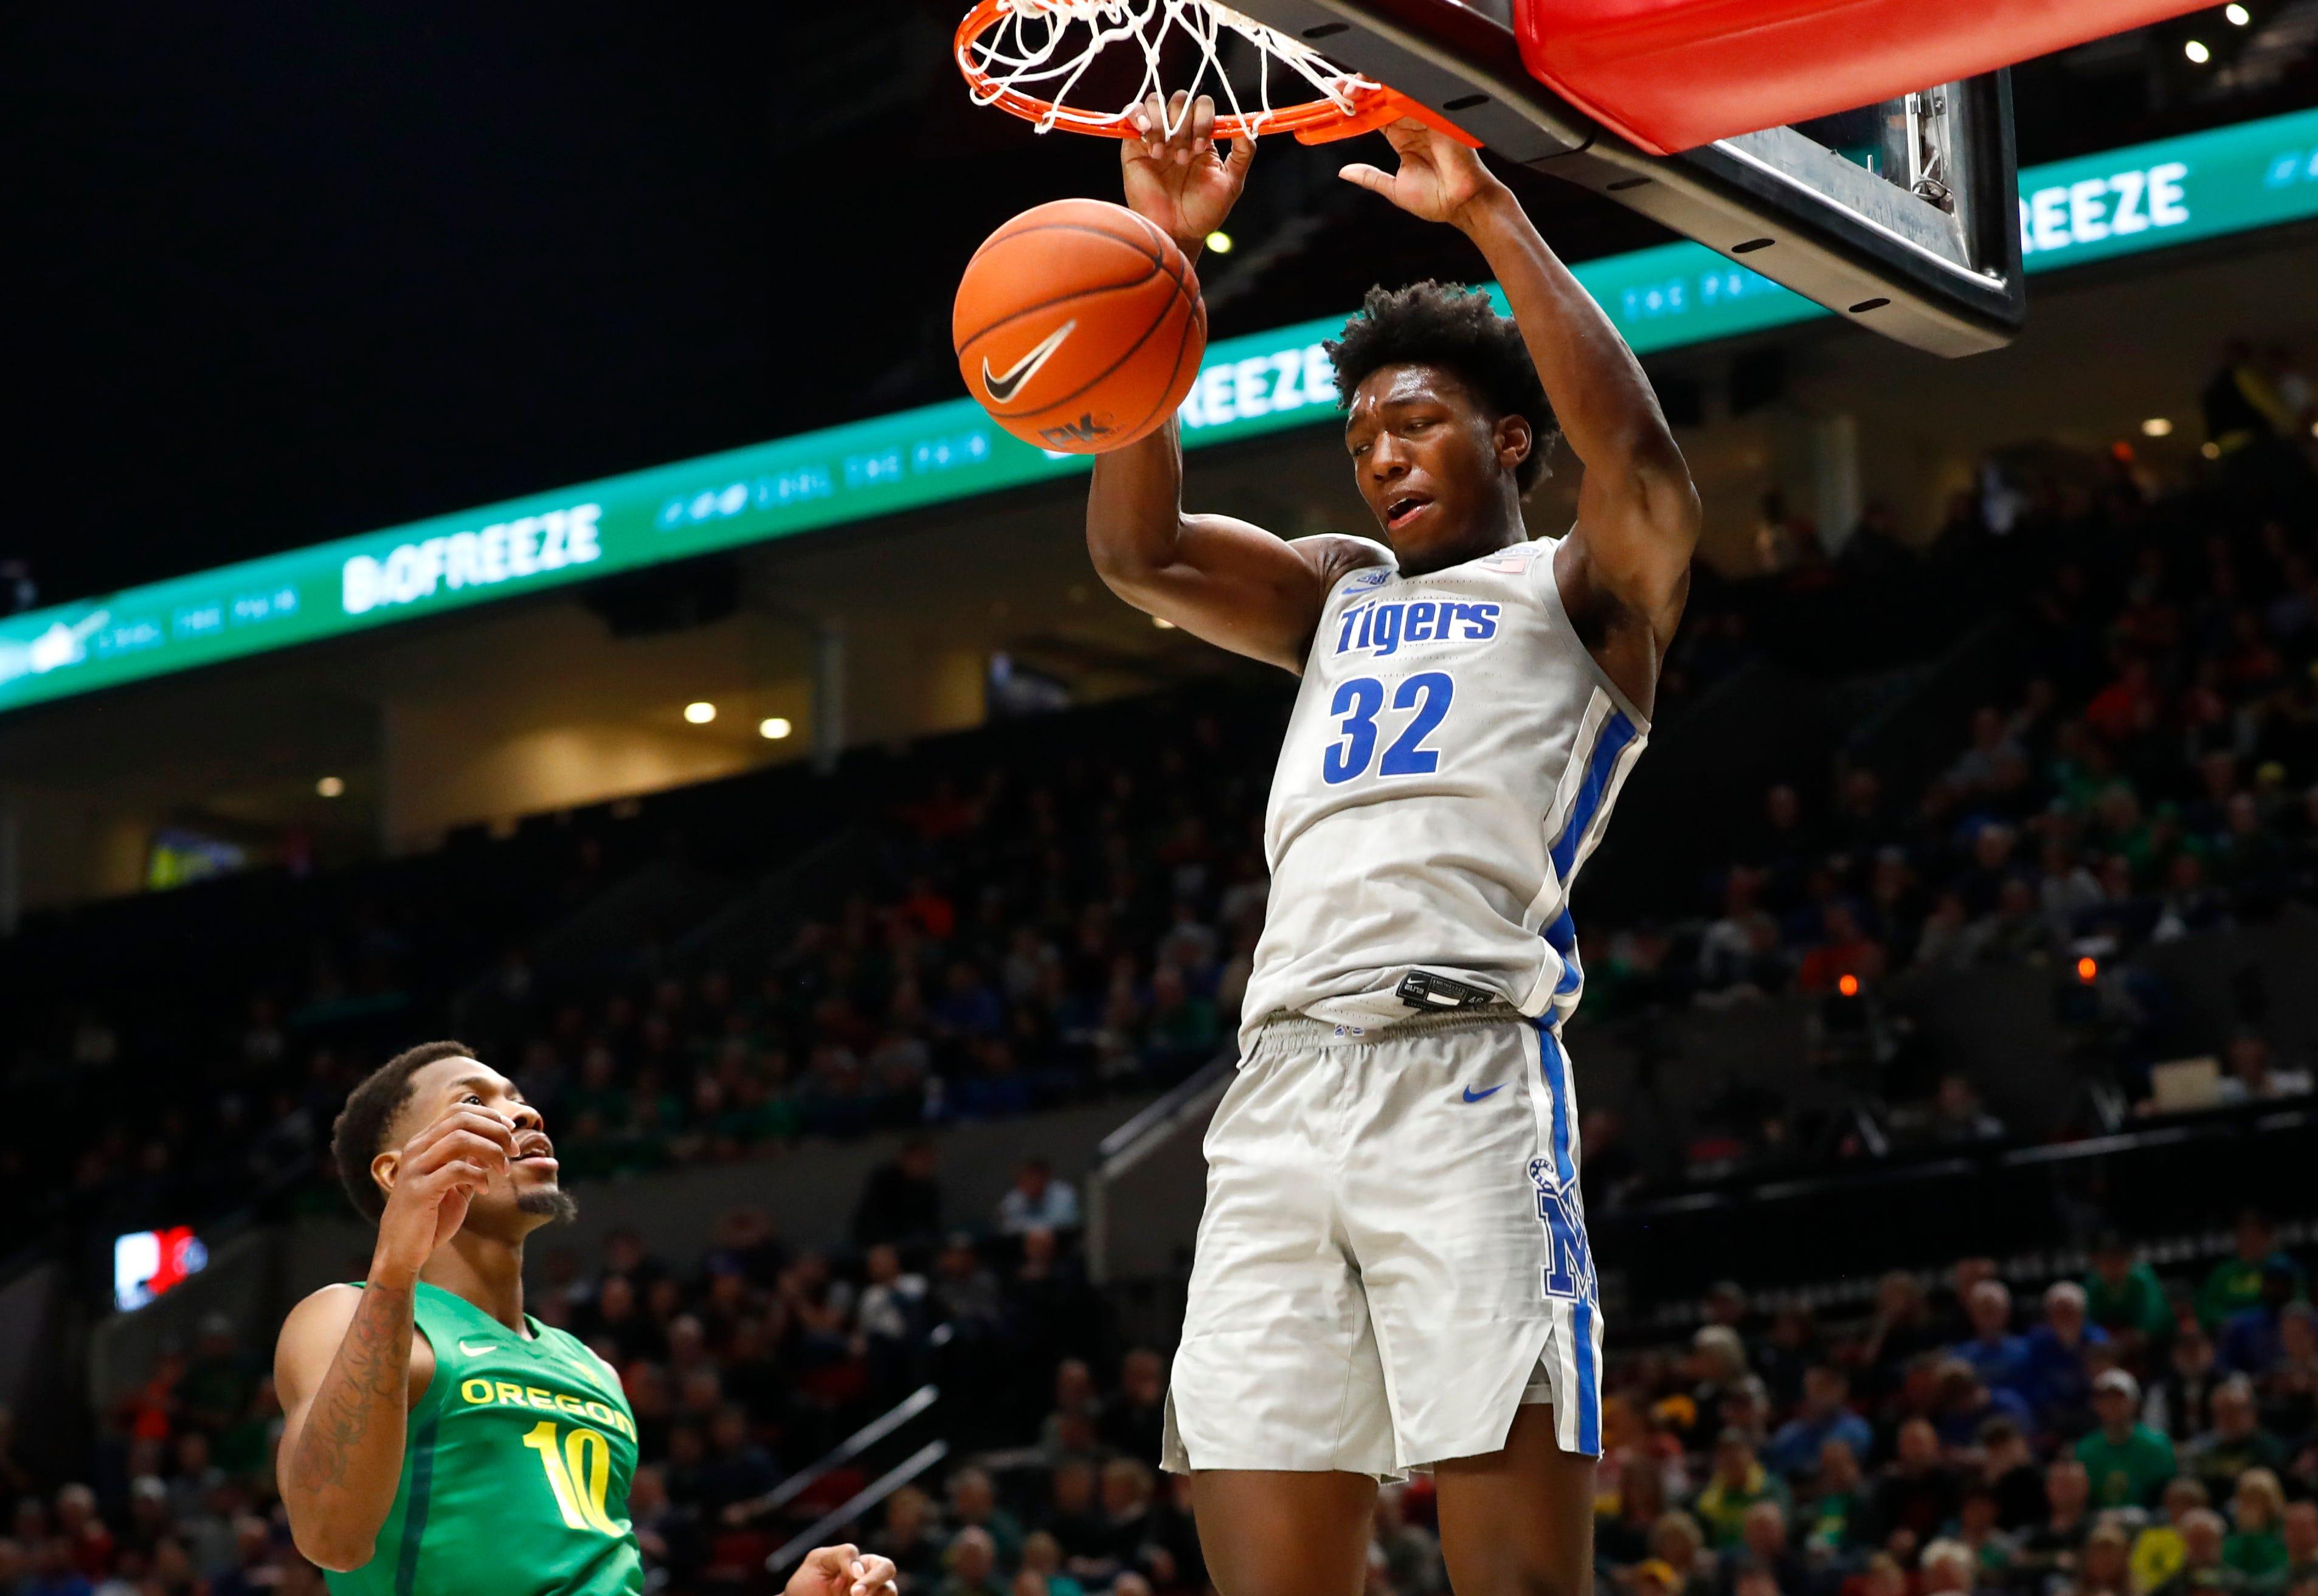 Memphis Tigers center James Wiseman dunks the ball over Oregon Ducks forward Shakur Juiston during their game at the Moda Center in Portland, Ore. on Tuesday, Nov. 12, 2019. Wiseman 2 / © Joe Rondone, Memphis Commercial Appeal via Imagn Content Services, LLC